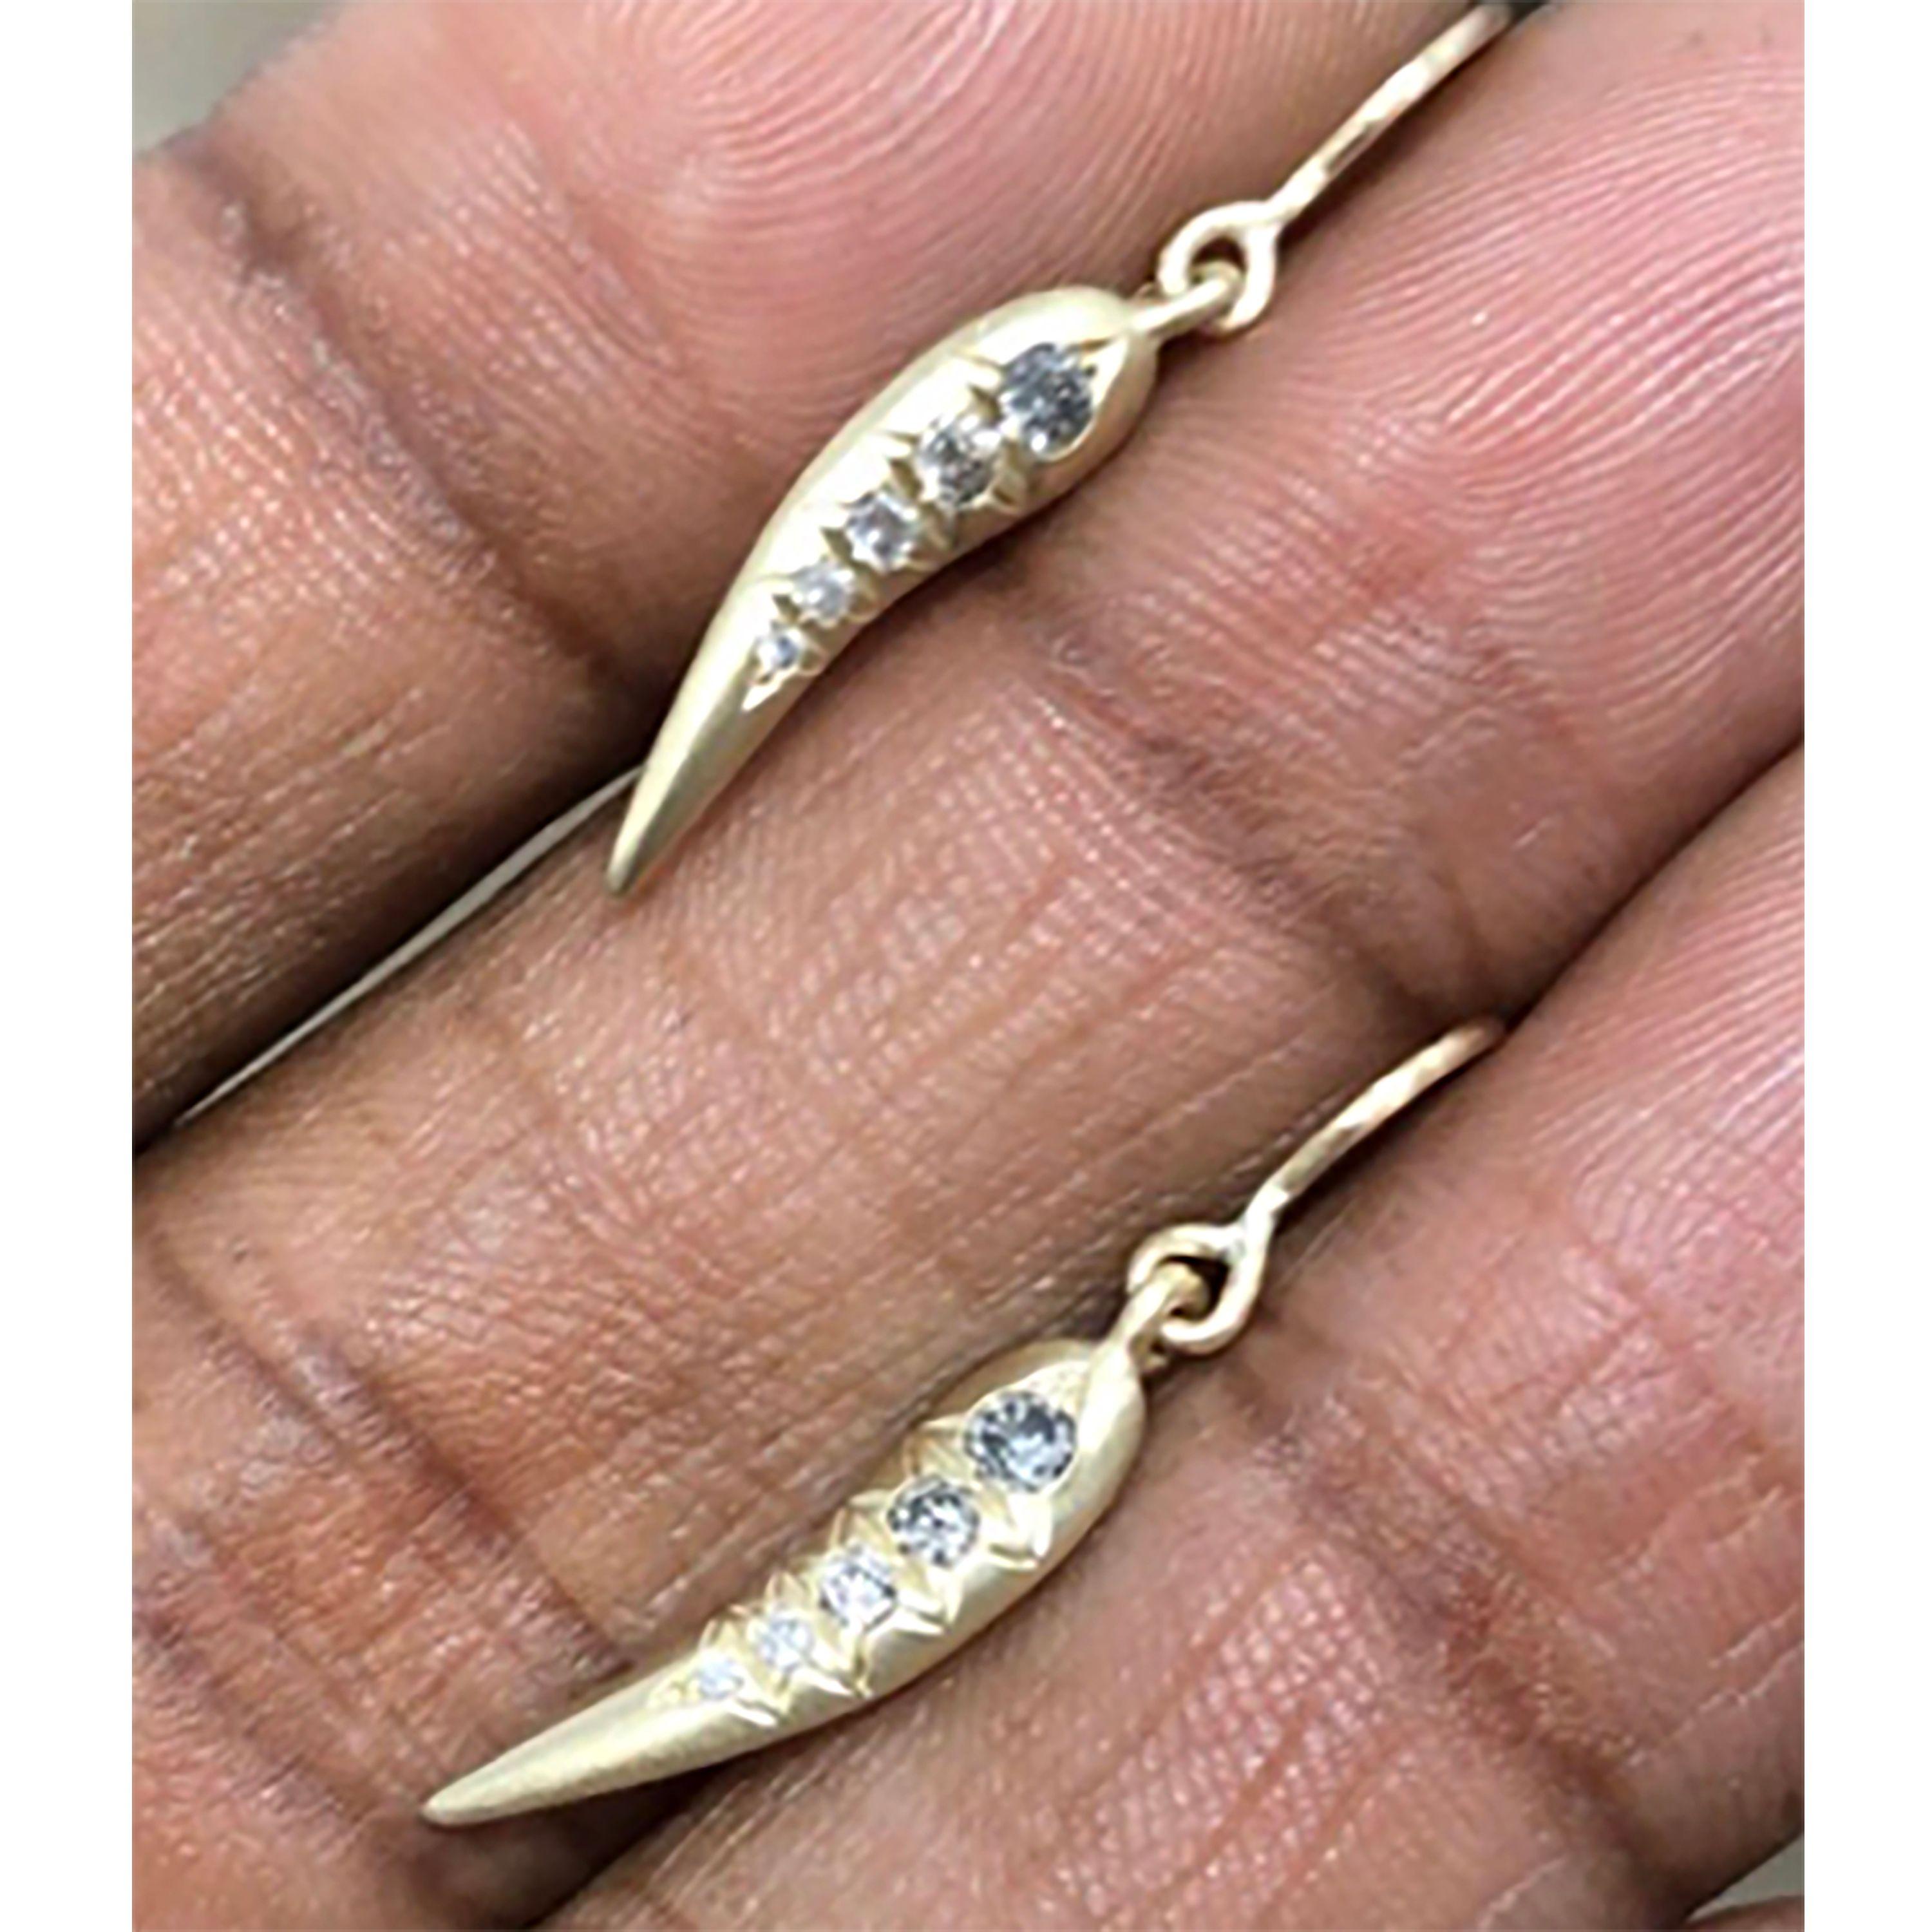 10K Chili Earrings diamonds graduate from a darker salt & pepper grey, medium tone grey, down to light hints of grey and finally white diamonds.

Delicate, fine solidity with hints of the past.

Danyell Rascoe's fascination for gems began as a young